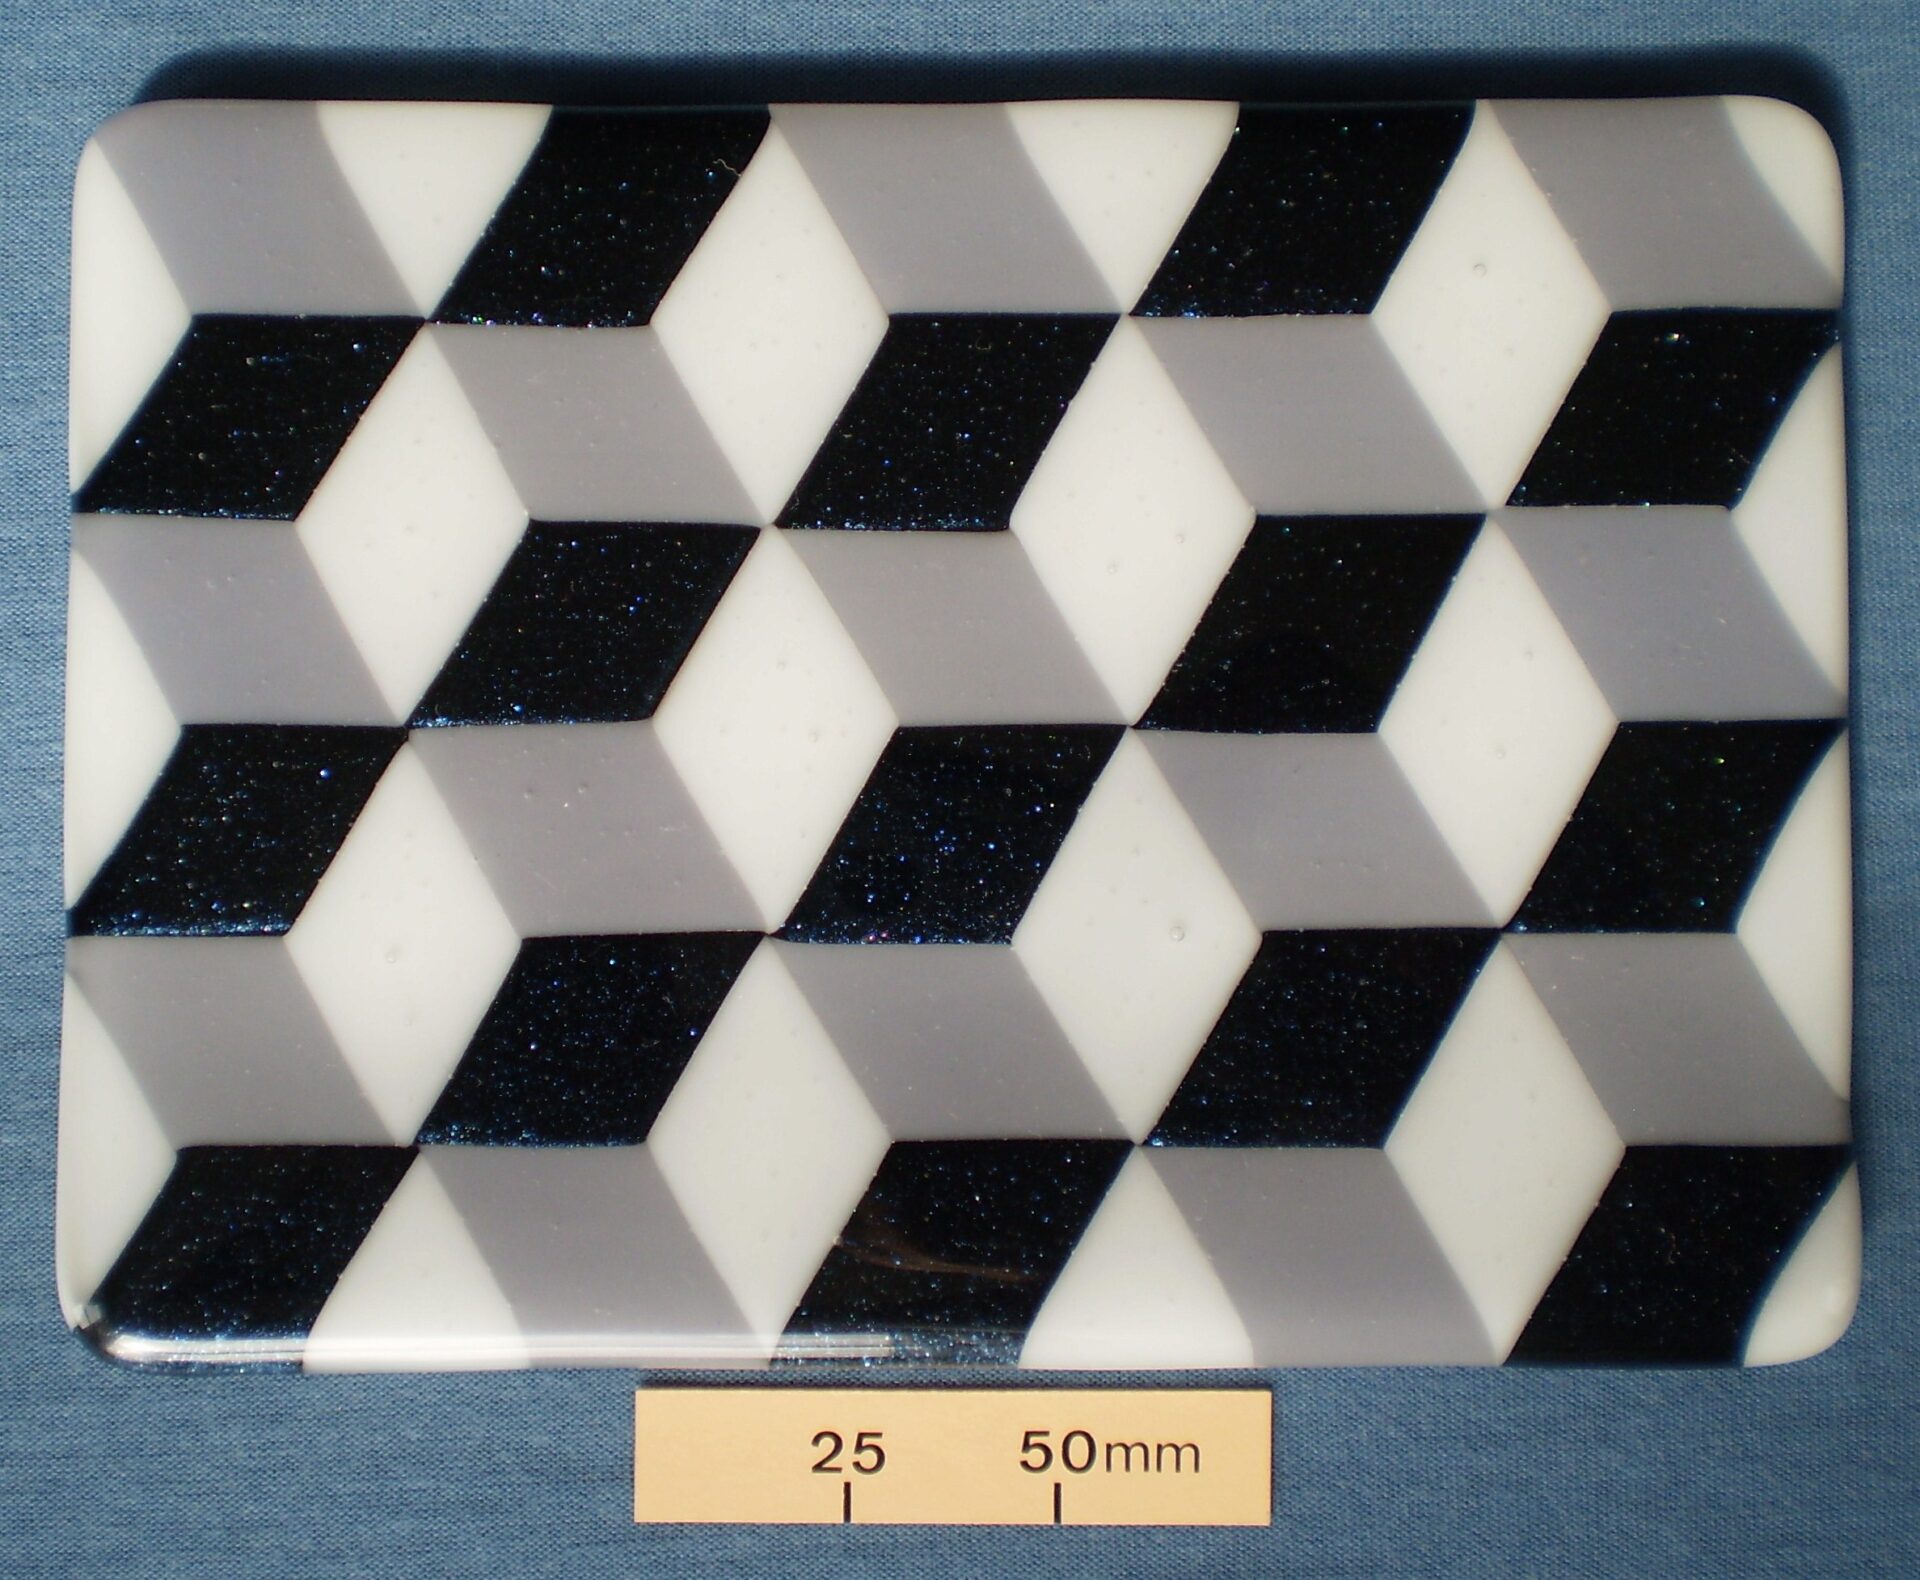 Kiln formed glass plate with optical illusion pattern